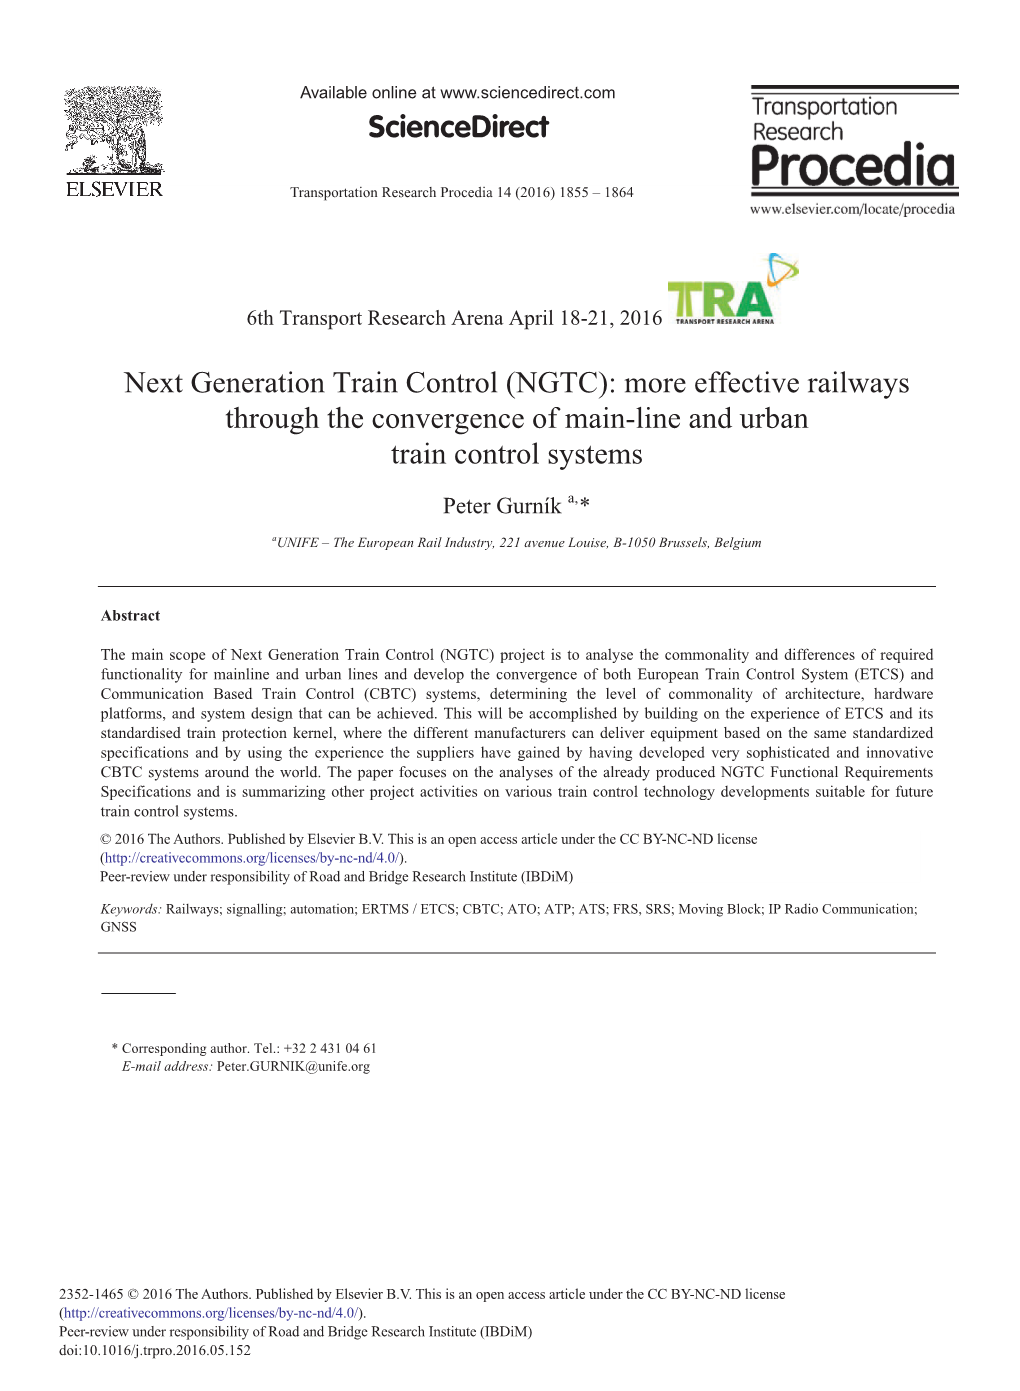 Next Generation Train Control (NGTC): More Effective Railways Through the Convergence of Main-Line and Urban Train Control Systems